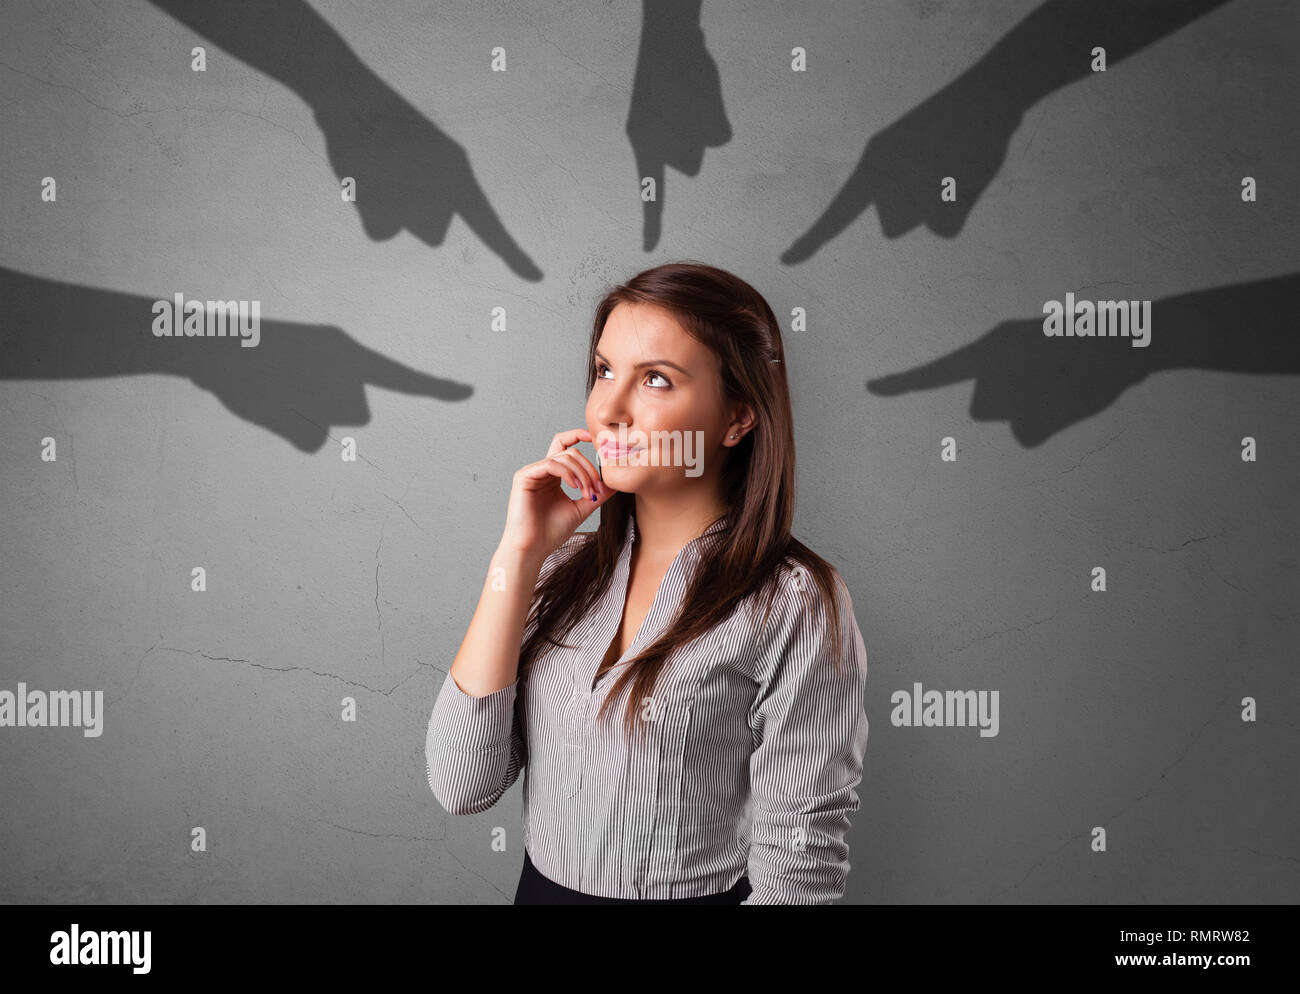 Young innocent  student with pointing hands concept  Stock Photo